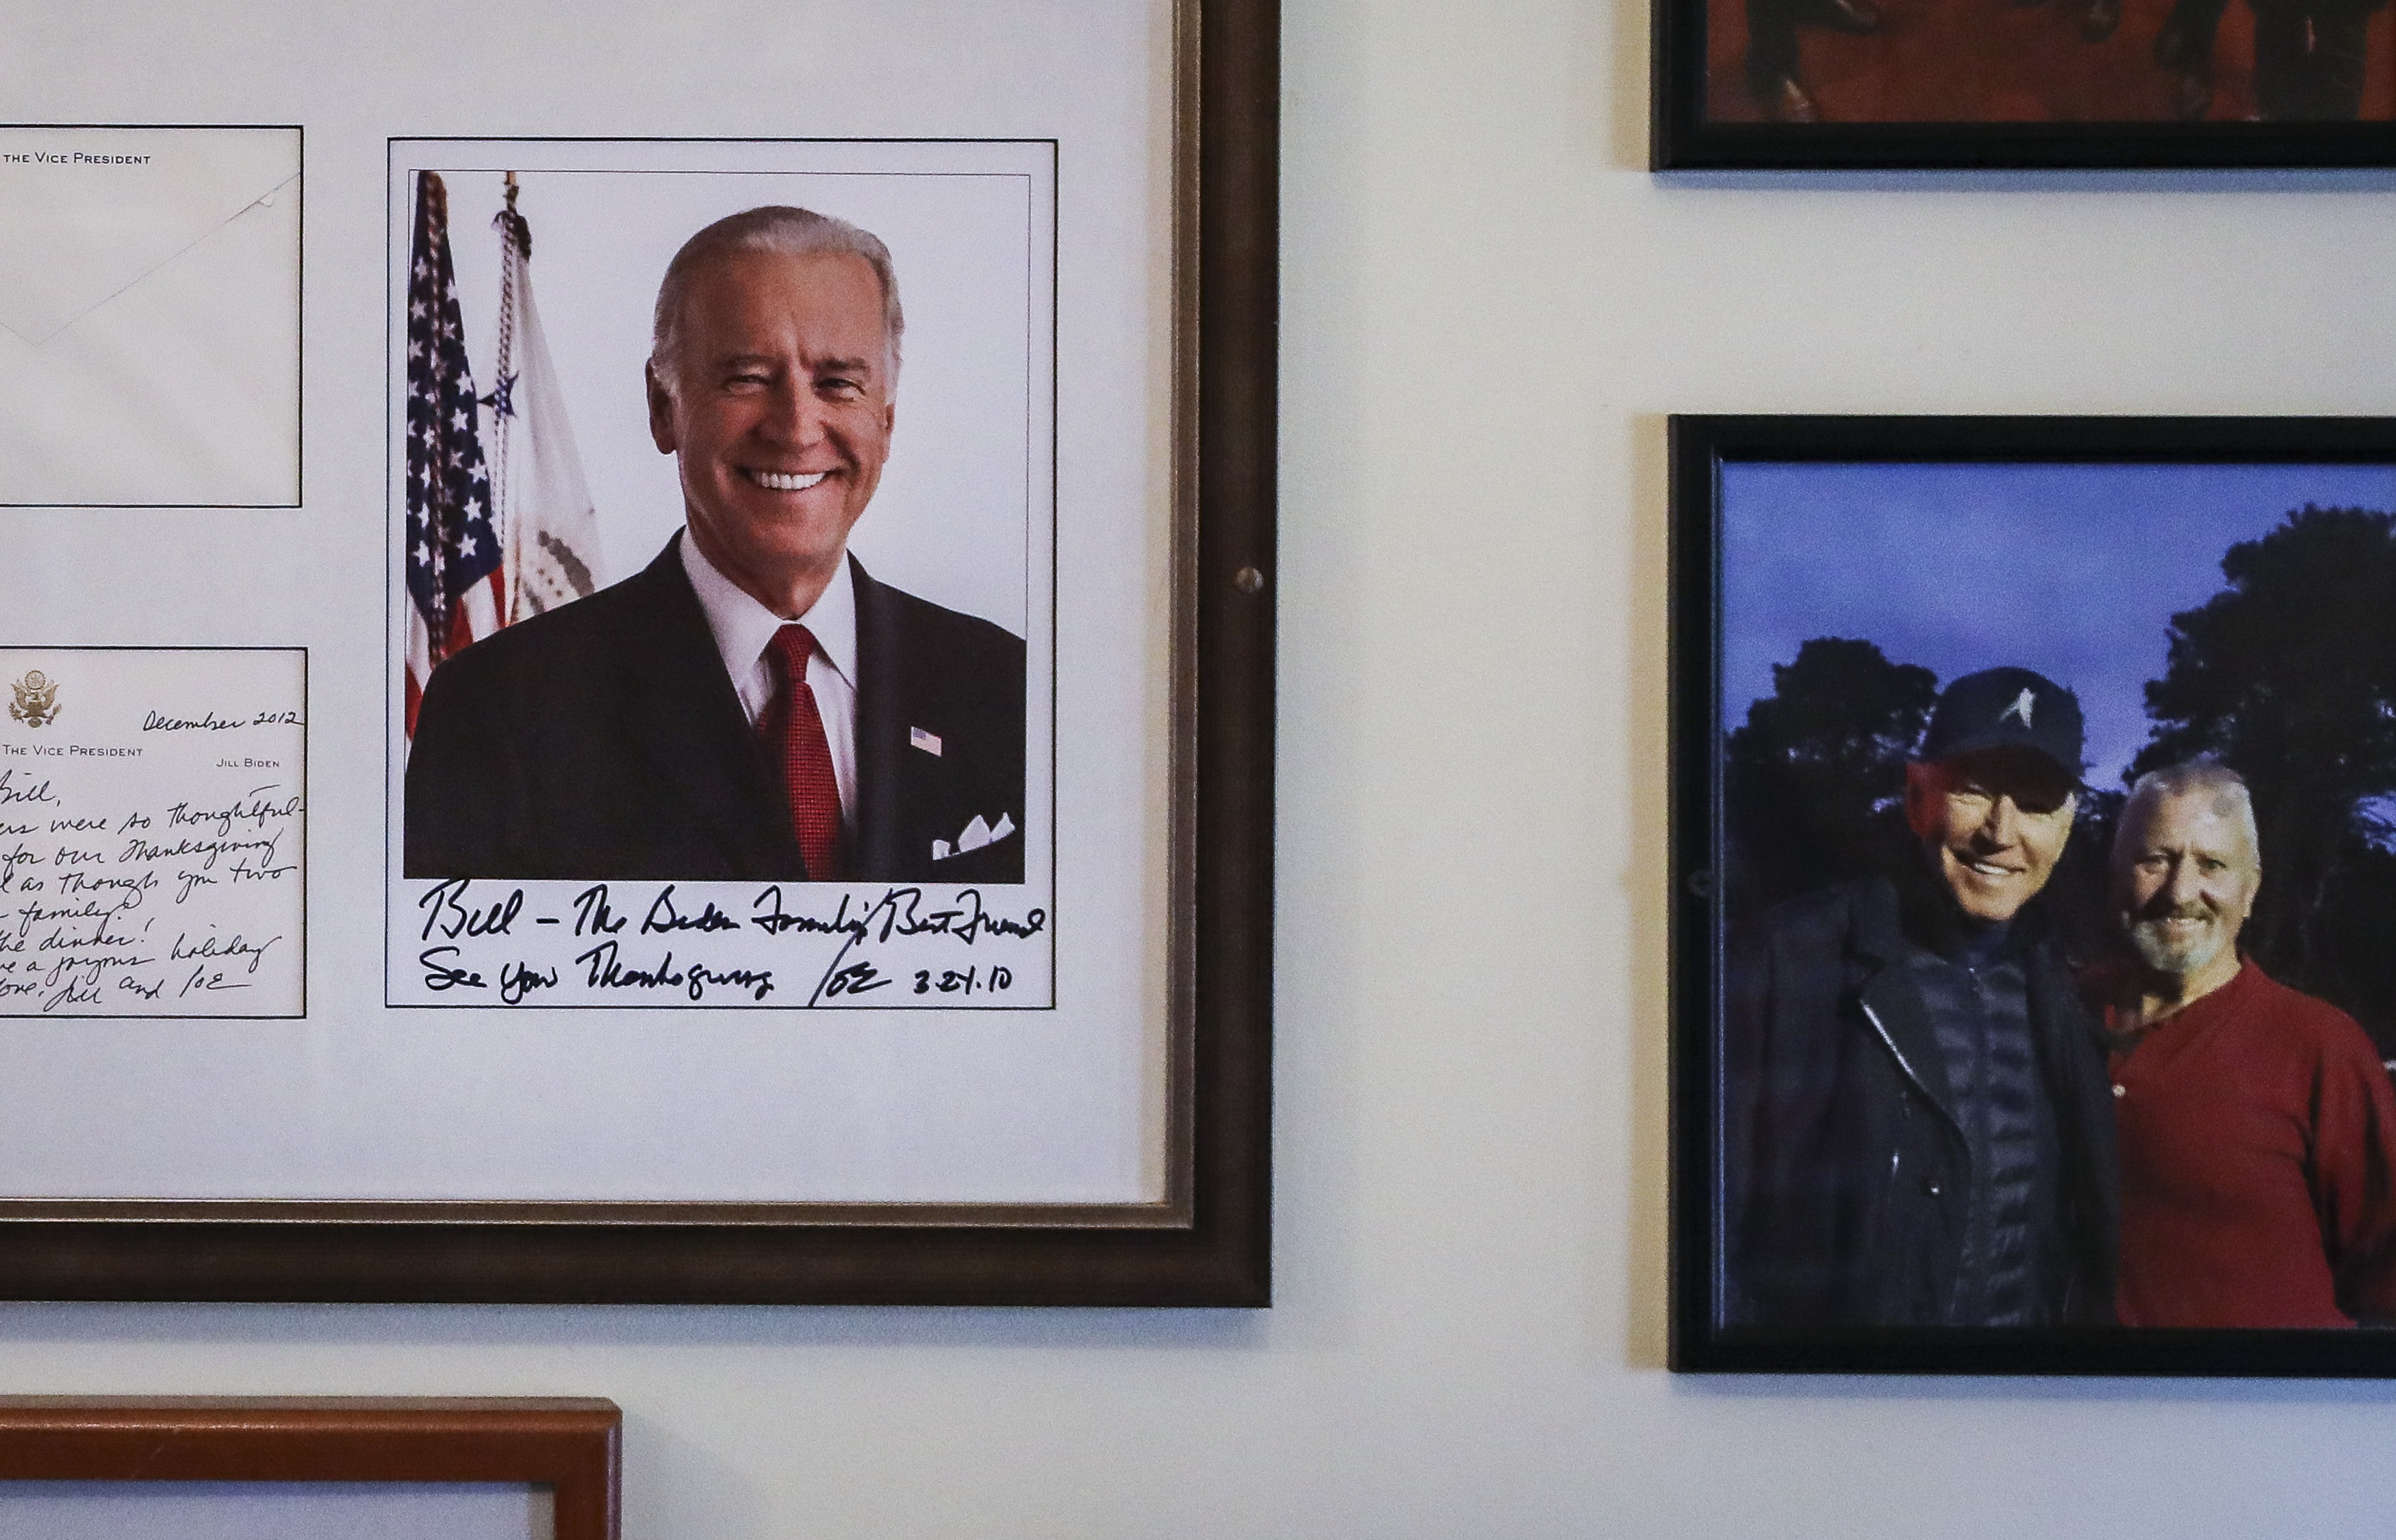 A signed photo from then Vice President Biden hung on the wall of Faregrounds Restaurant and Pudley's Pub in Nantucket on Wednesday. Written in Biden’s script is a note that reads, “See you Thanksgiving”.